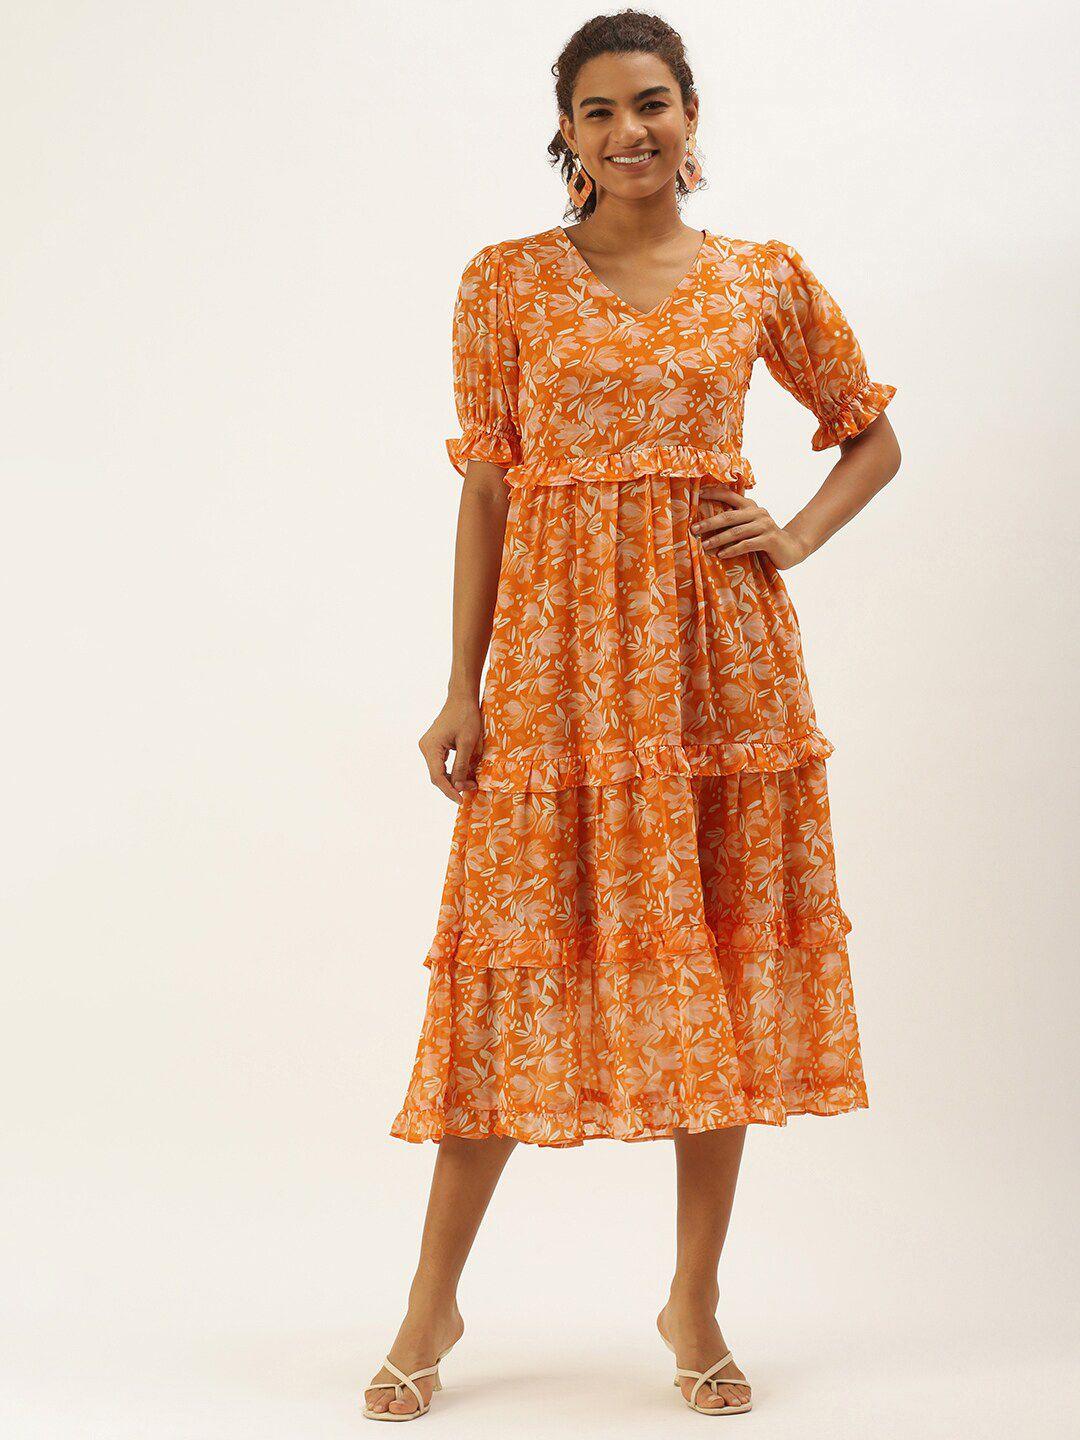 sangria printed a-line shaped dress with frill details